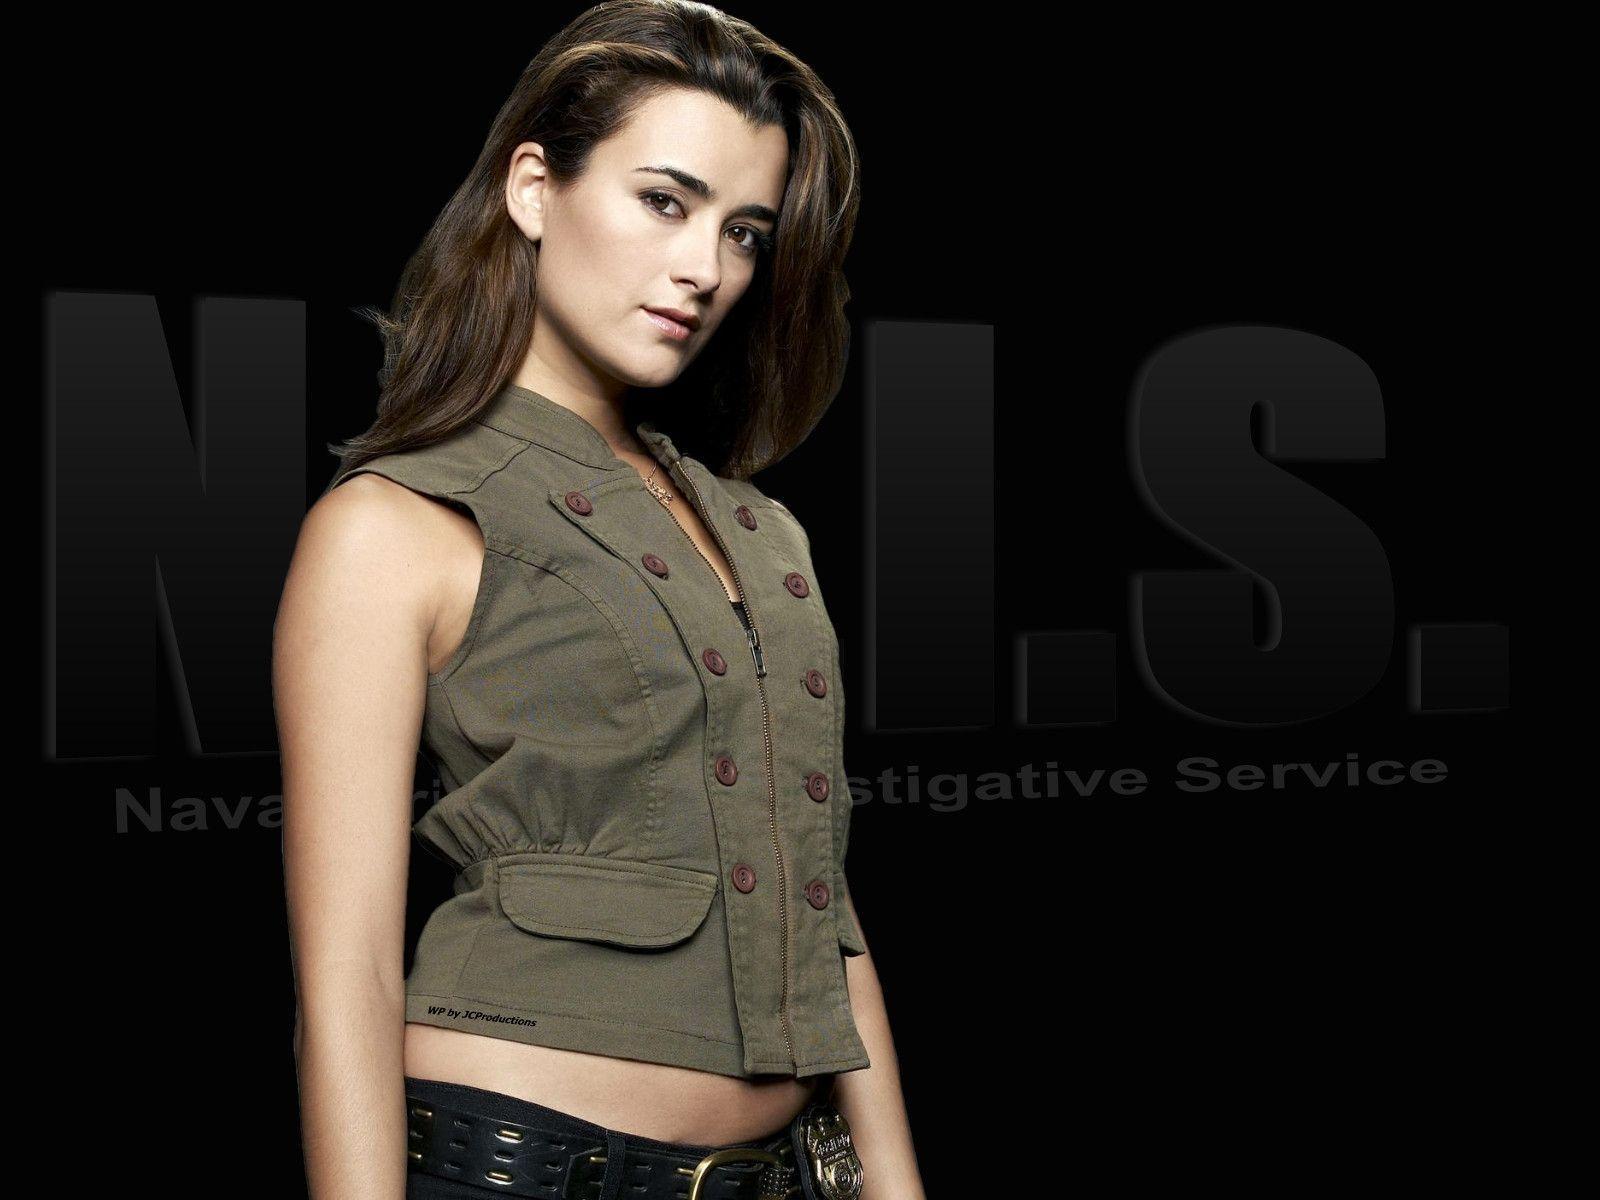 Pictures Of Ziva From Ncis Wallpapers